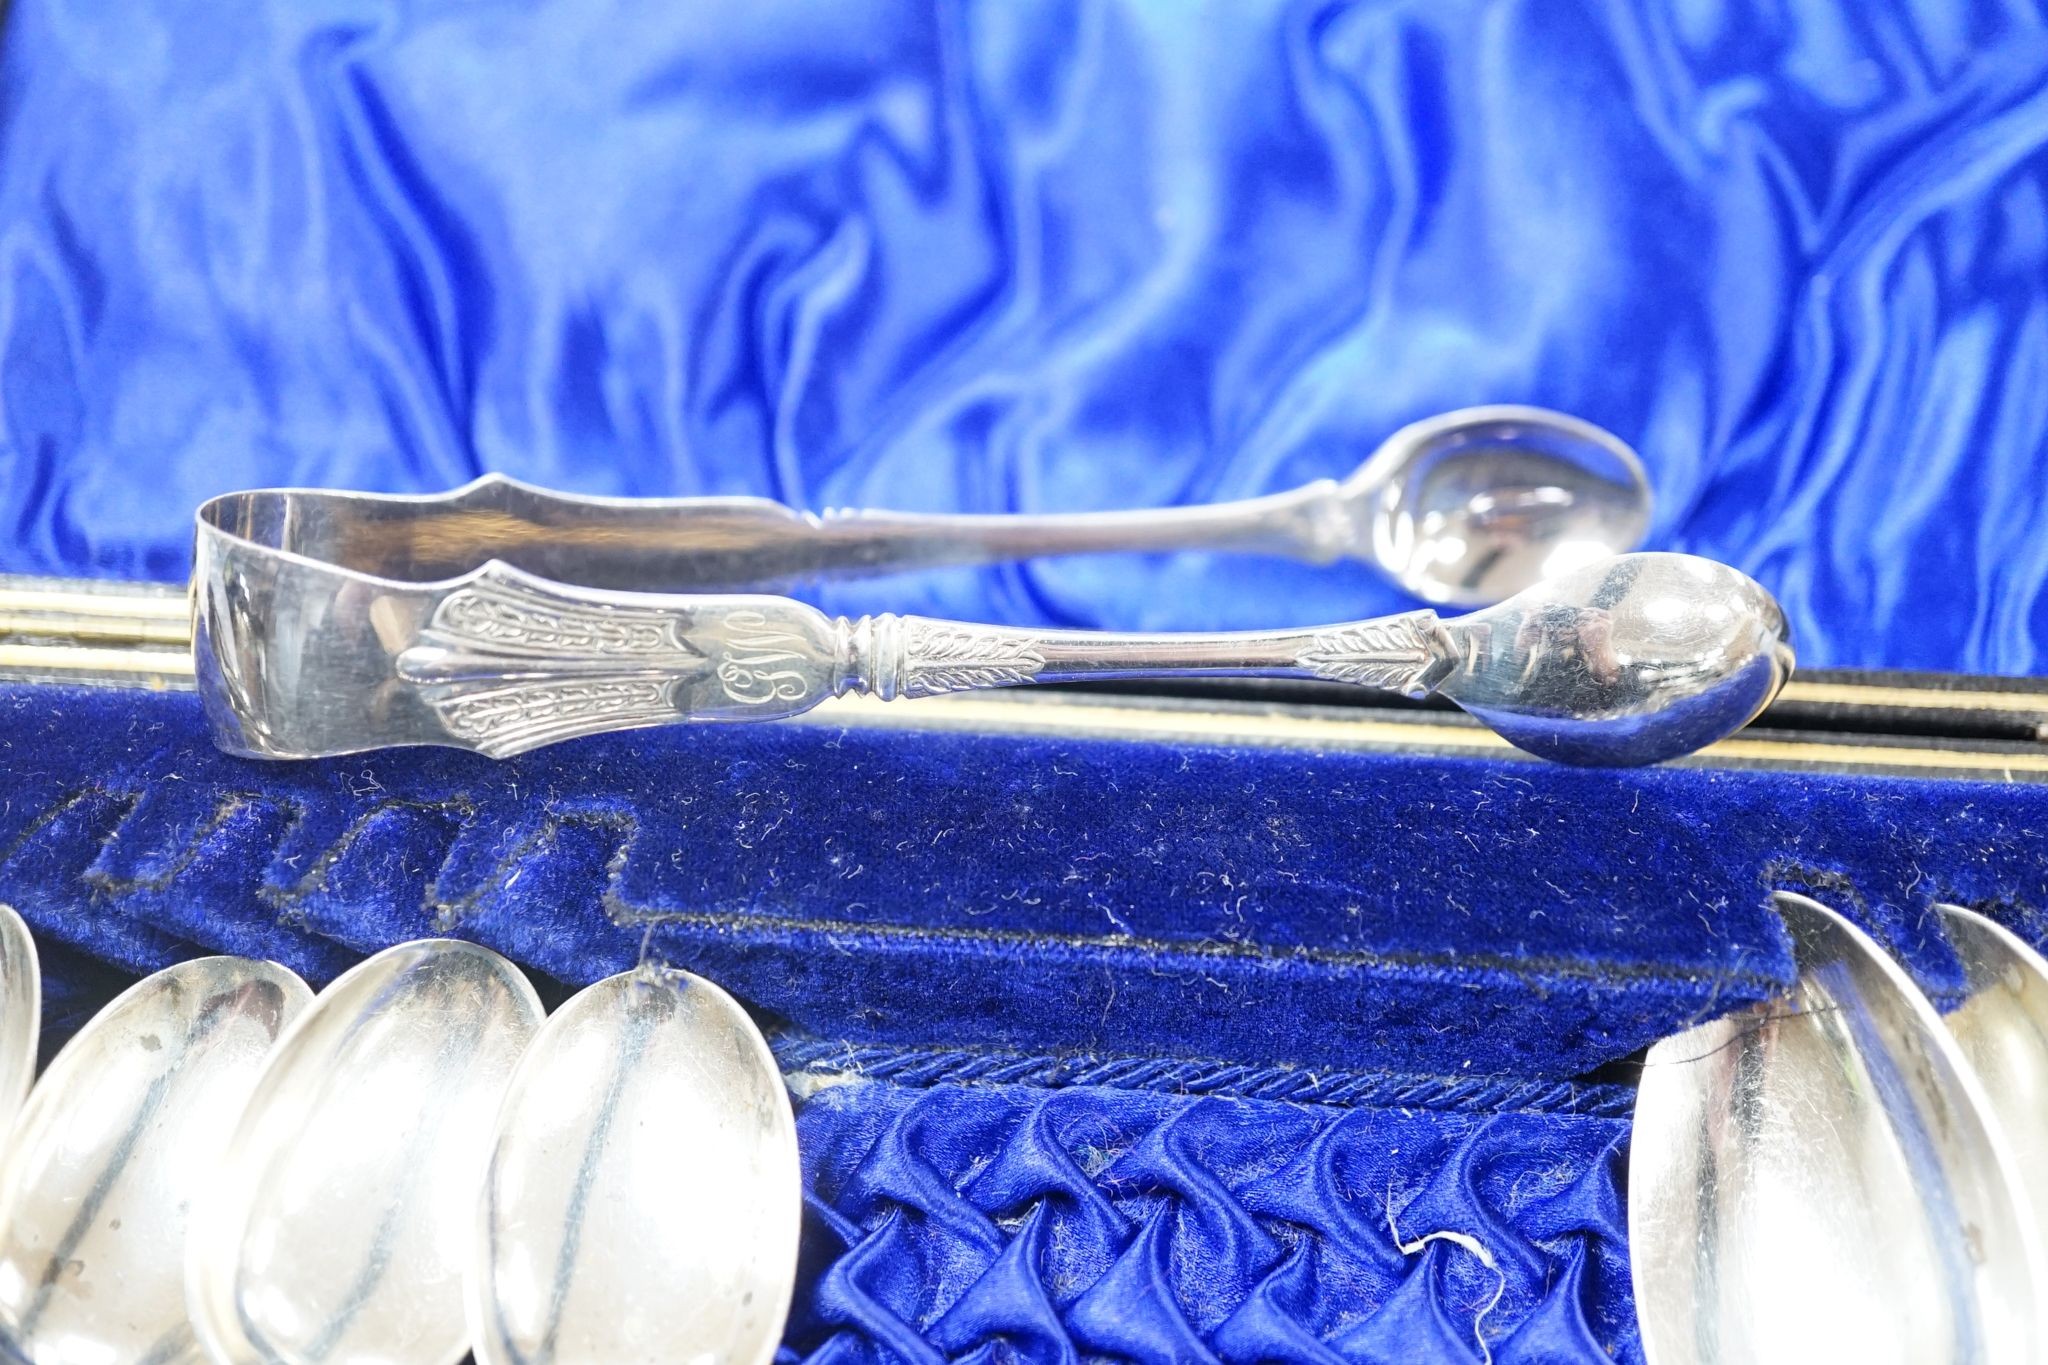 A cased set of six silver bean end coffee spoons, two other sets of six teaspoons and a pair of silver sugar tongs.